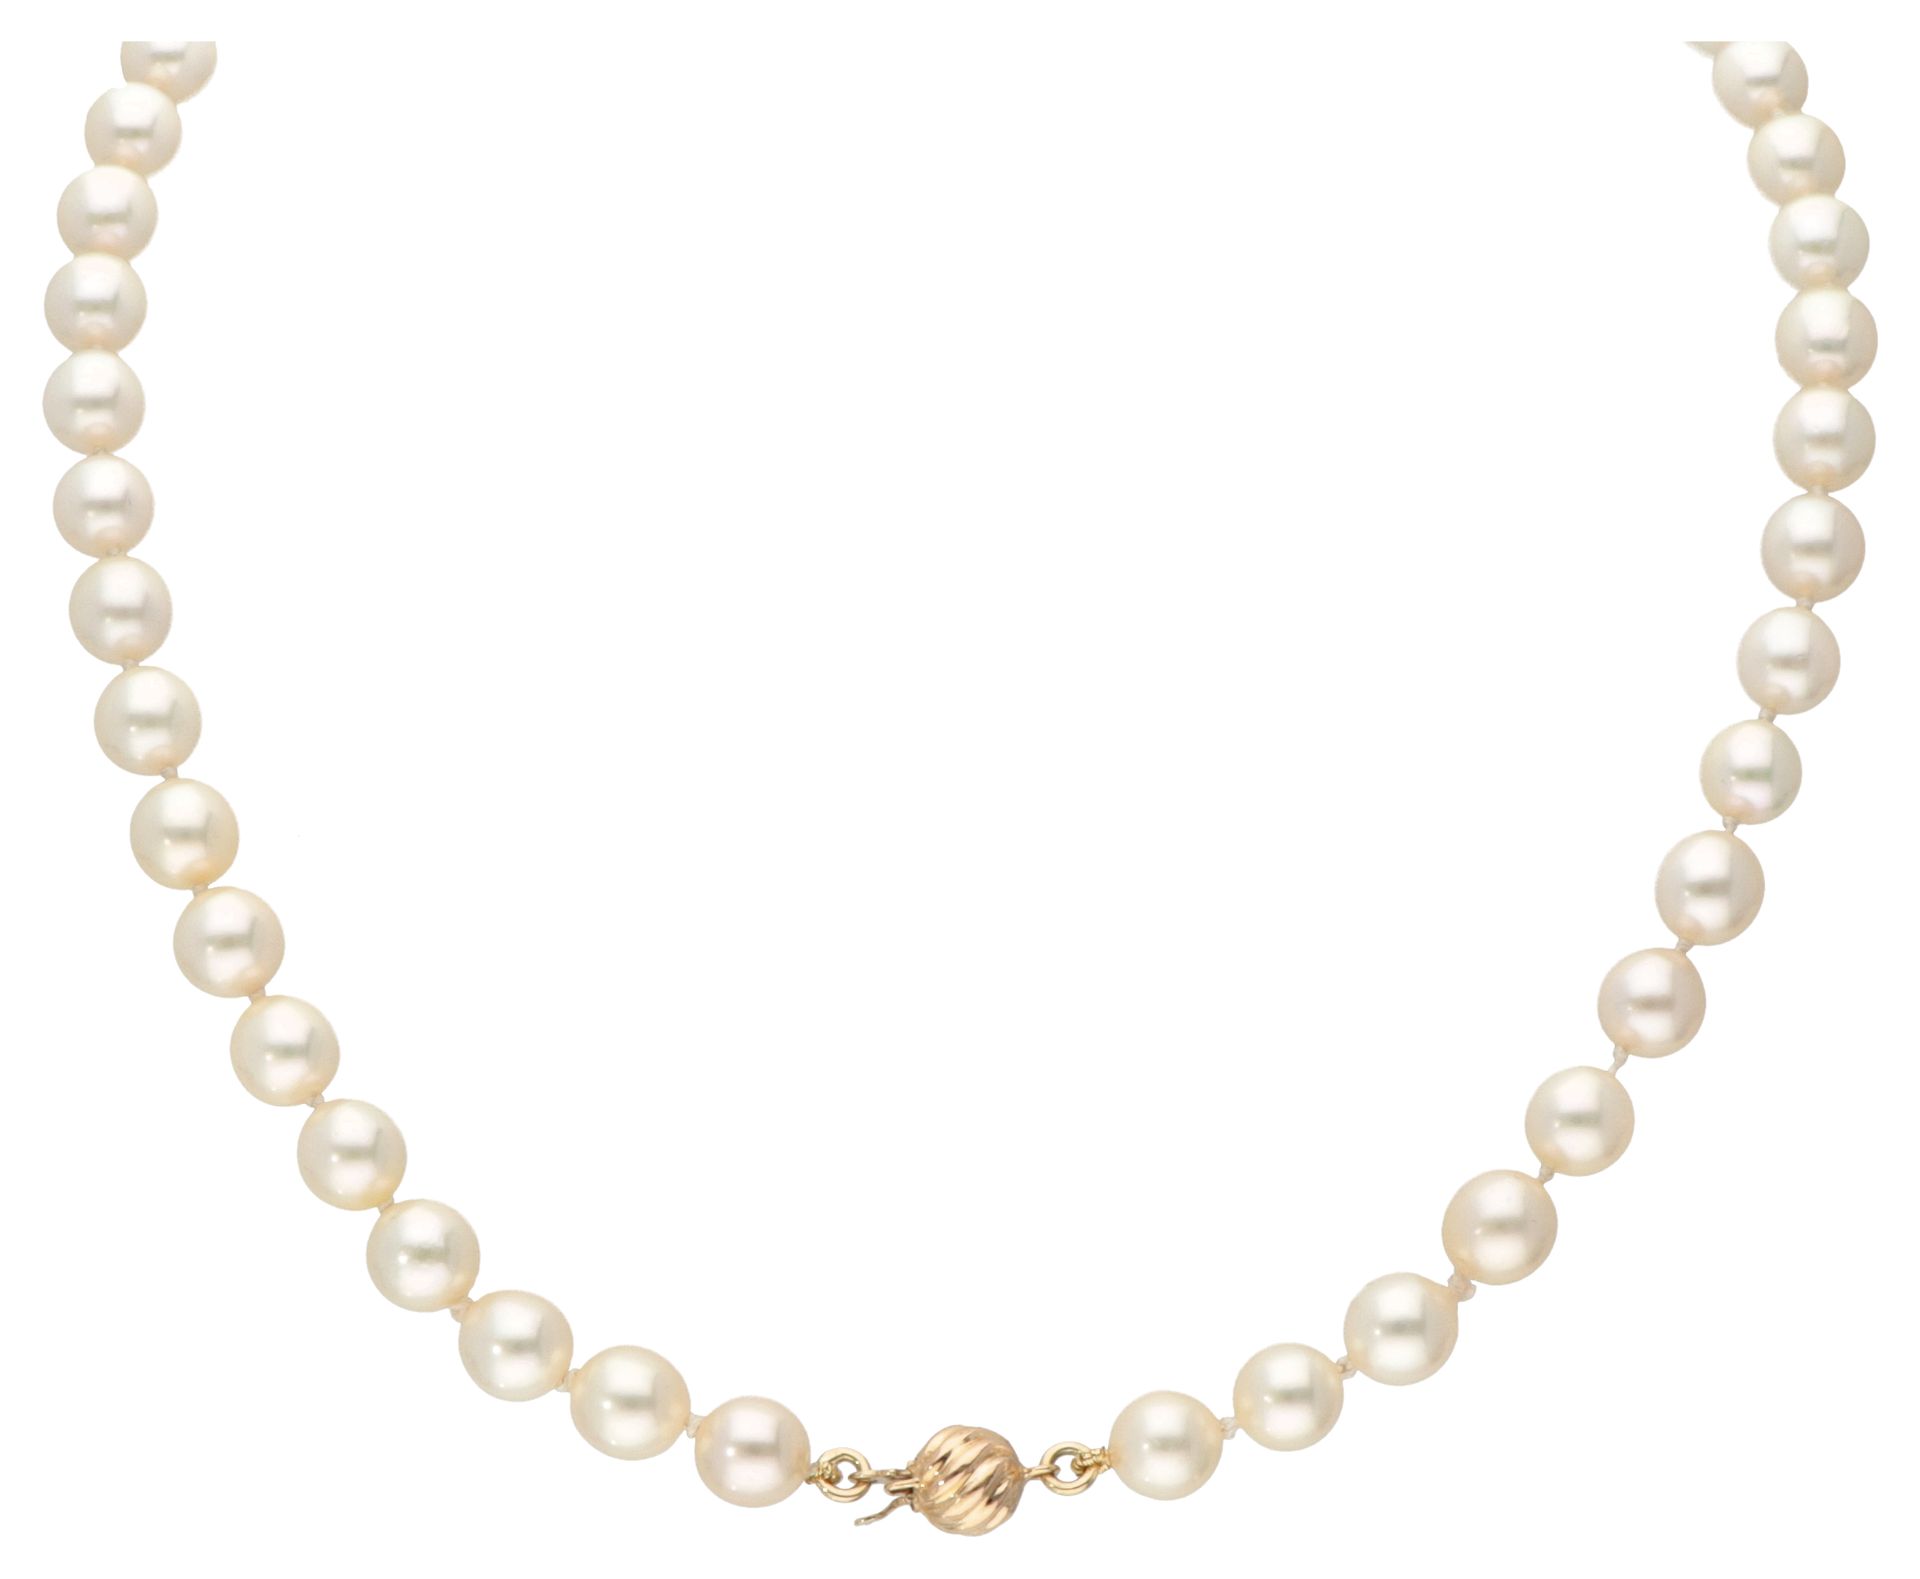 Saltwater pearl necklace with a 14K. Yellow gold closure. Punzoni: 585. In ottim&hellip;